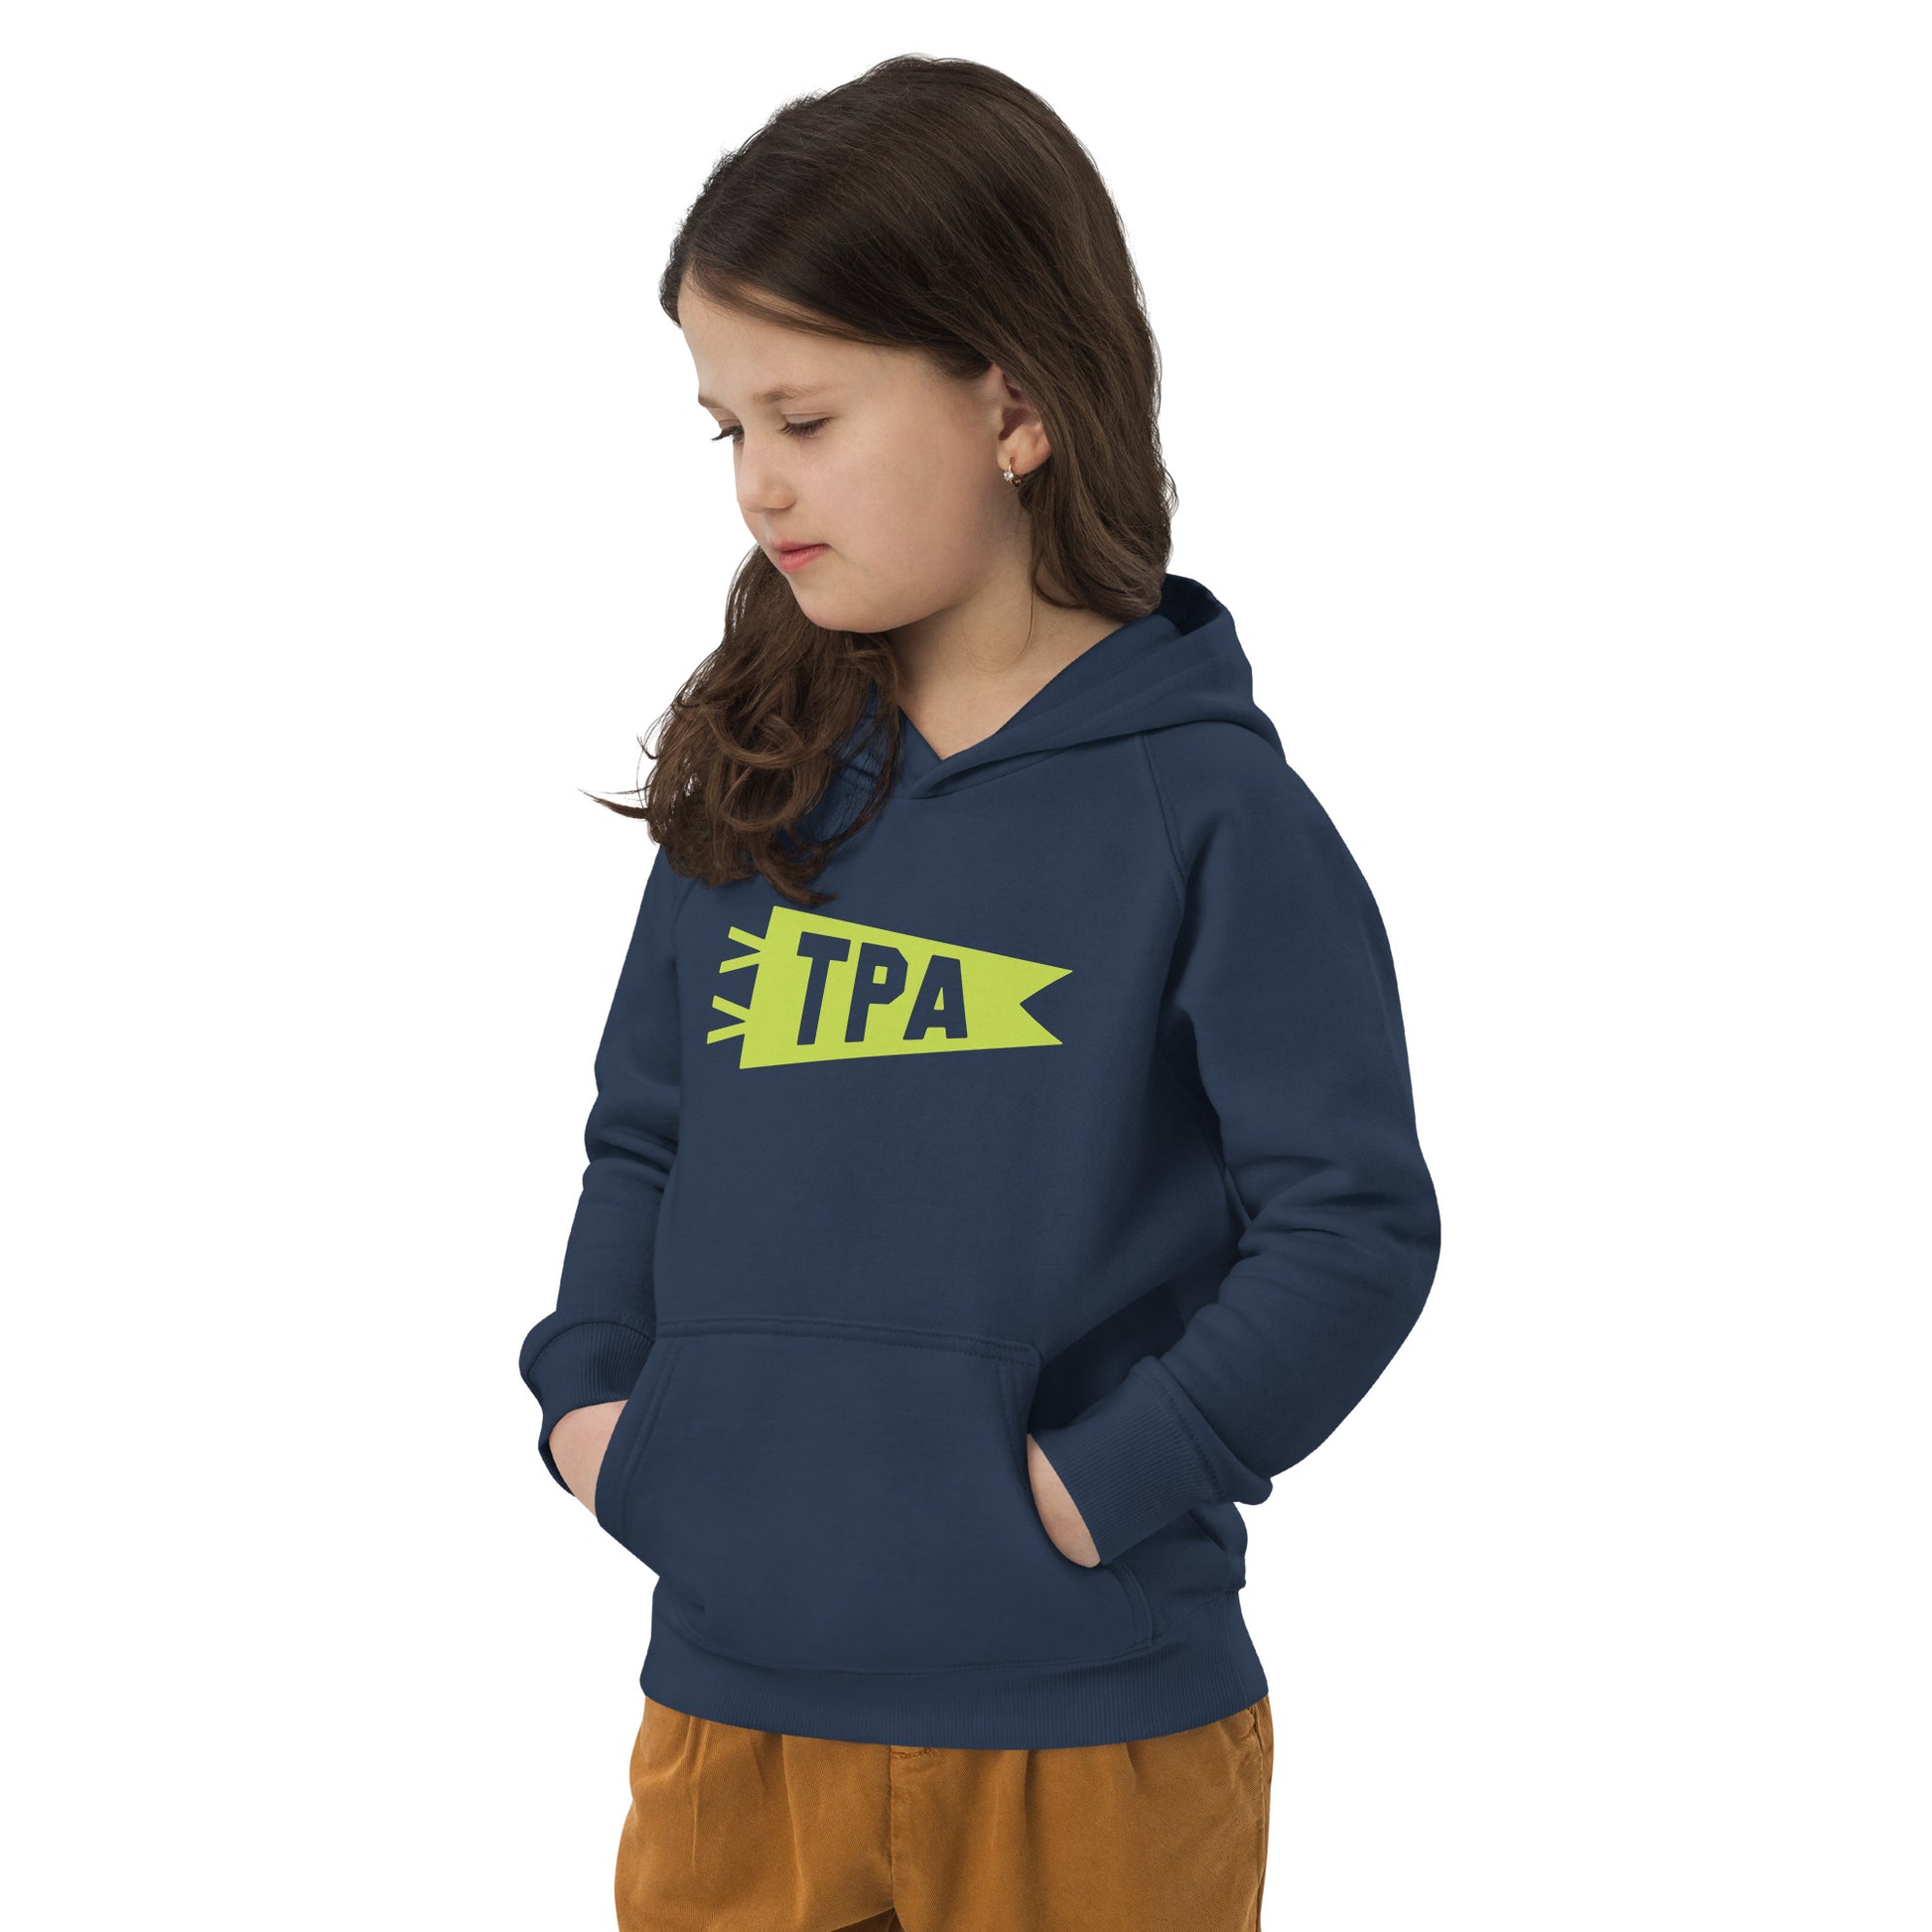 Kid's Sustainable Hoodie - Green Graphic • TPA Tampa • YHM Designs - Image 05